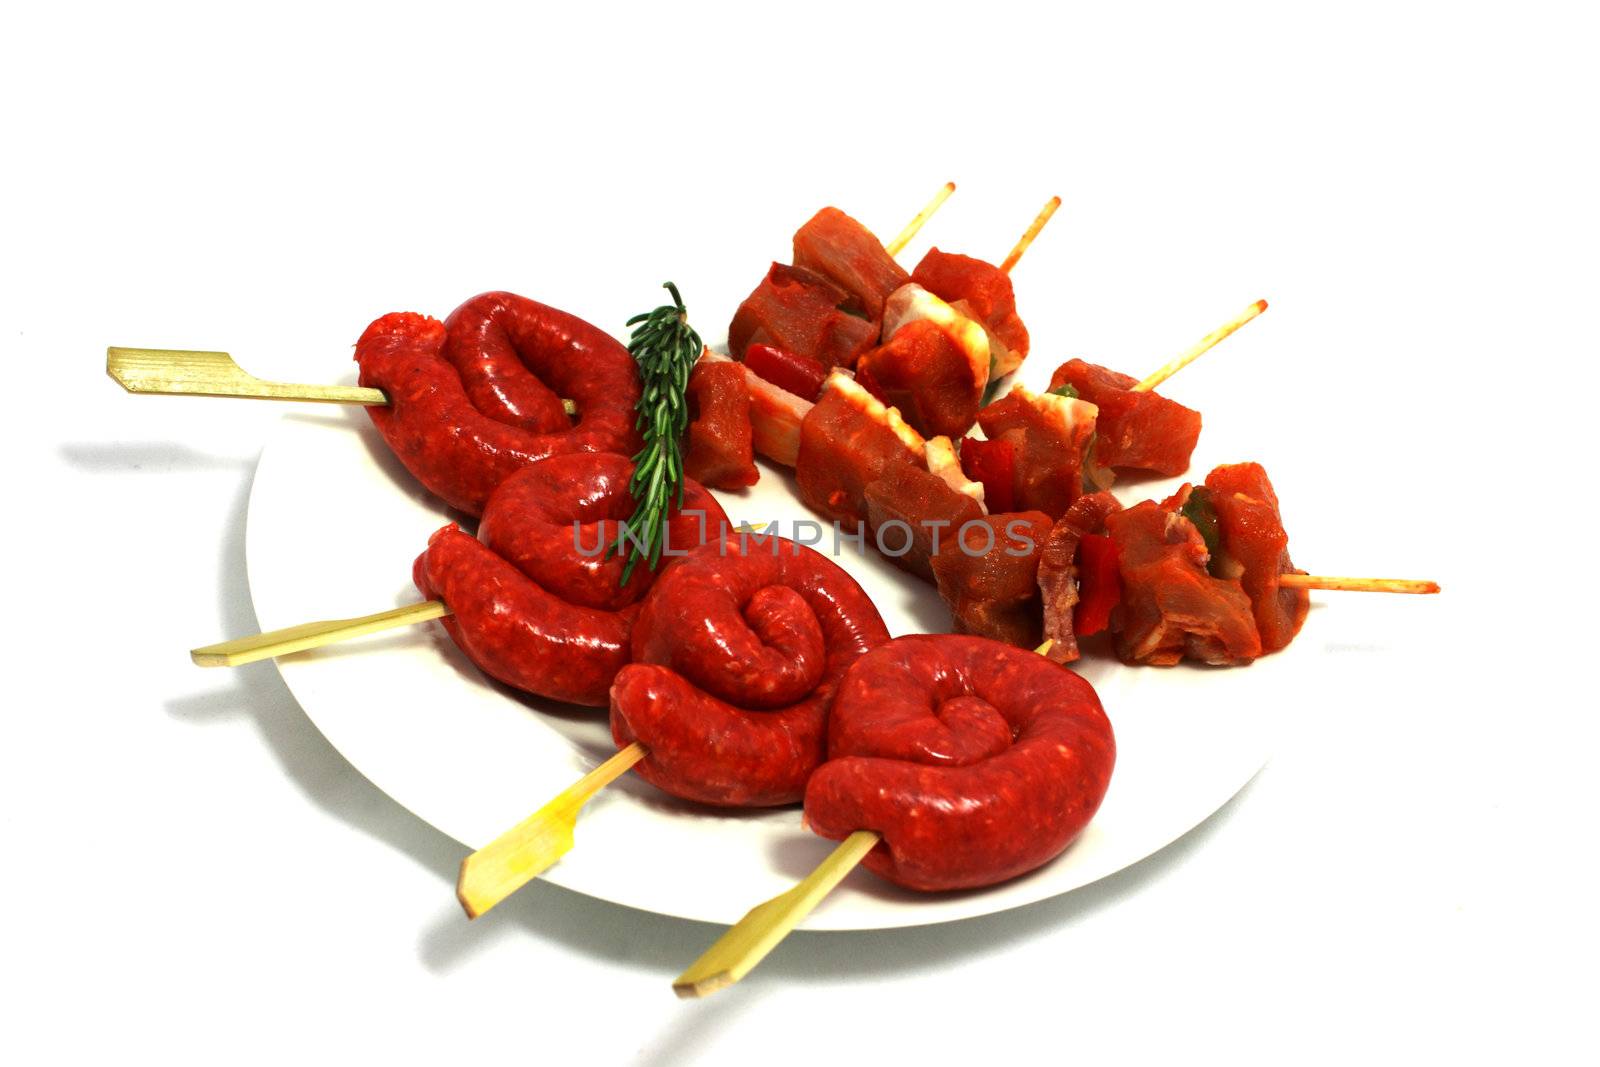 raw shashlik and sausages for barbecue on the white plate